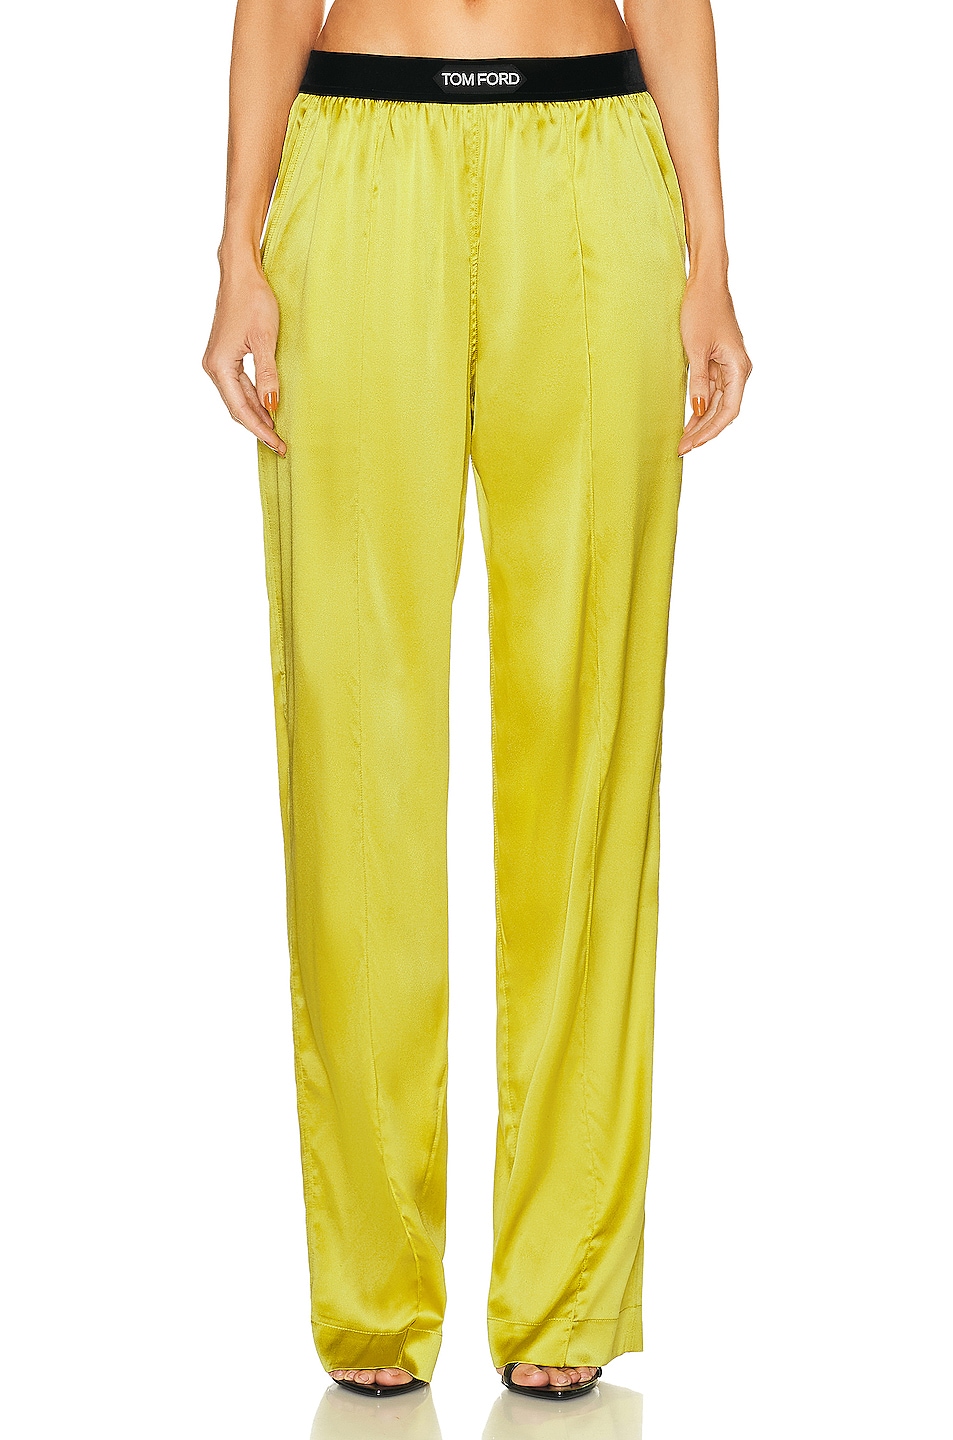 Image 1 of TOM FORD Satin Pant in Charteuse Citrine